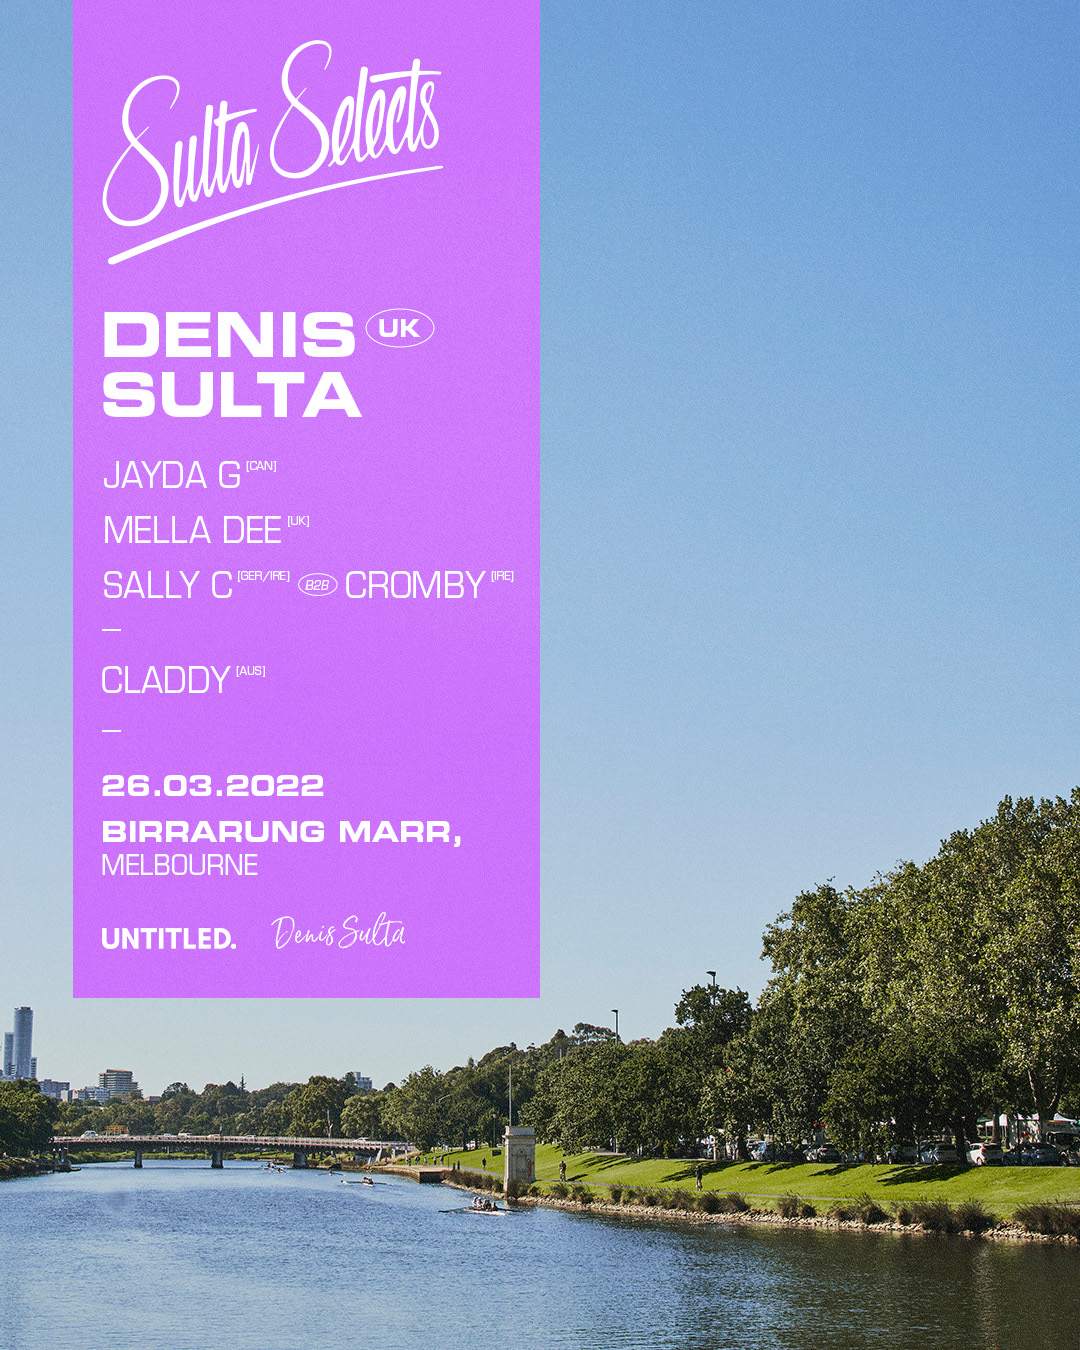 Sulta Selects - Birrarung Marr Day Party feat. Denis Sulta - フライヤー表